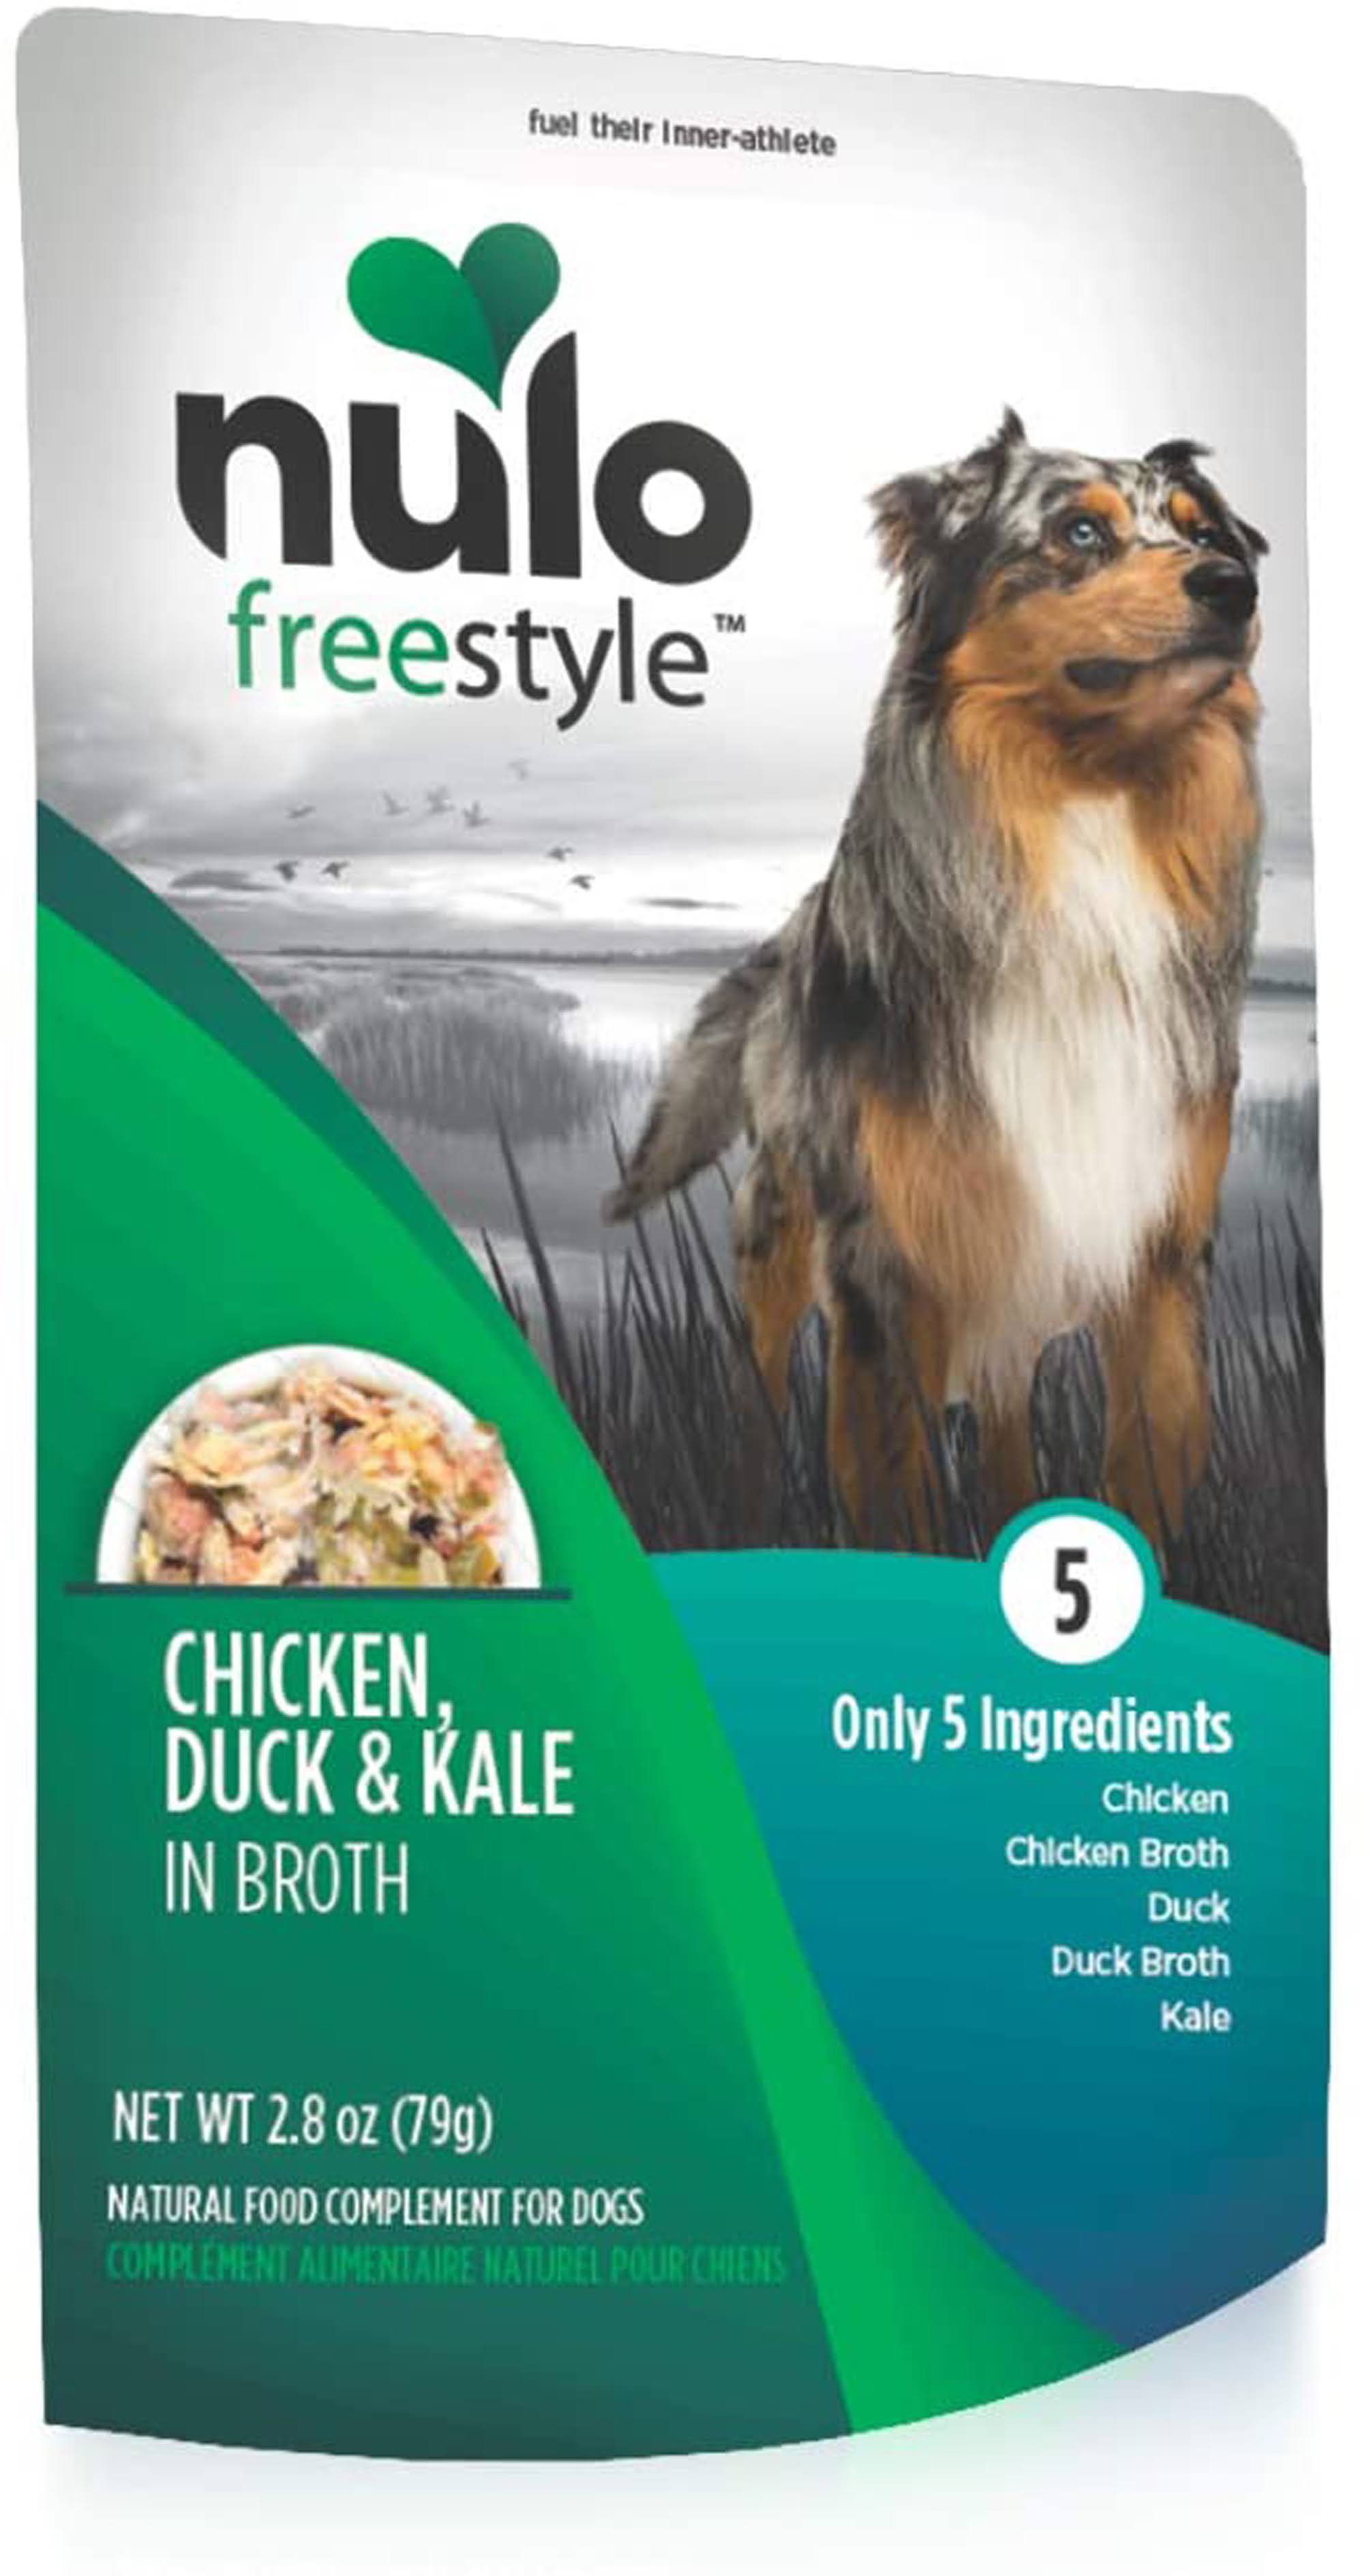 Nulo Freestyle Chicken, Duck, & Kale in Broth Dog Food 2.8 oz